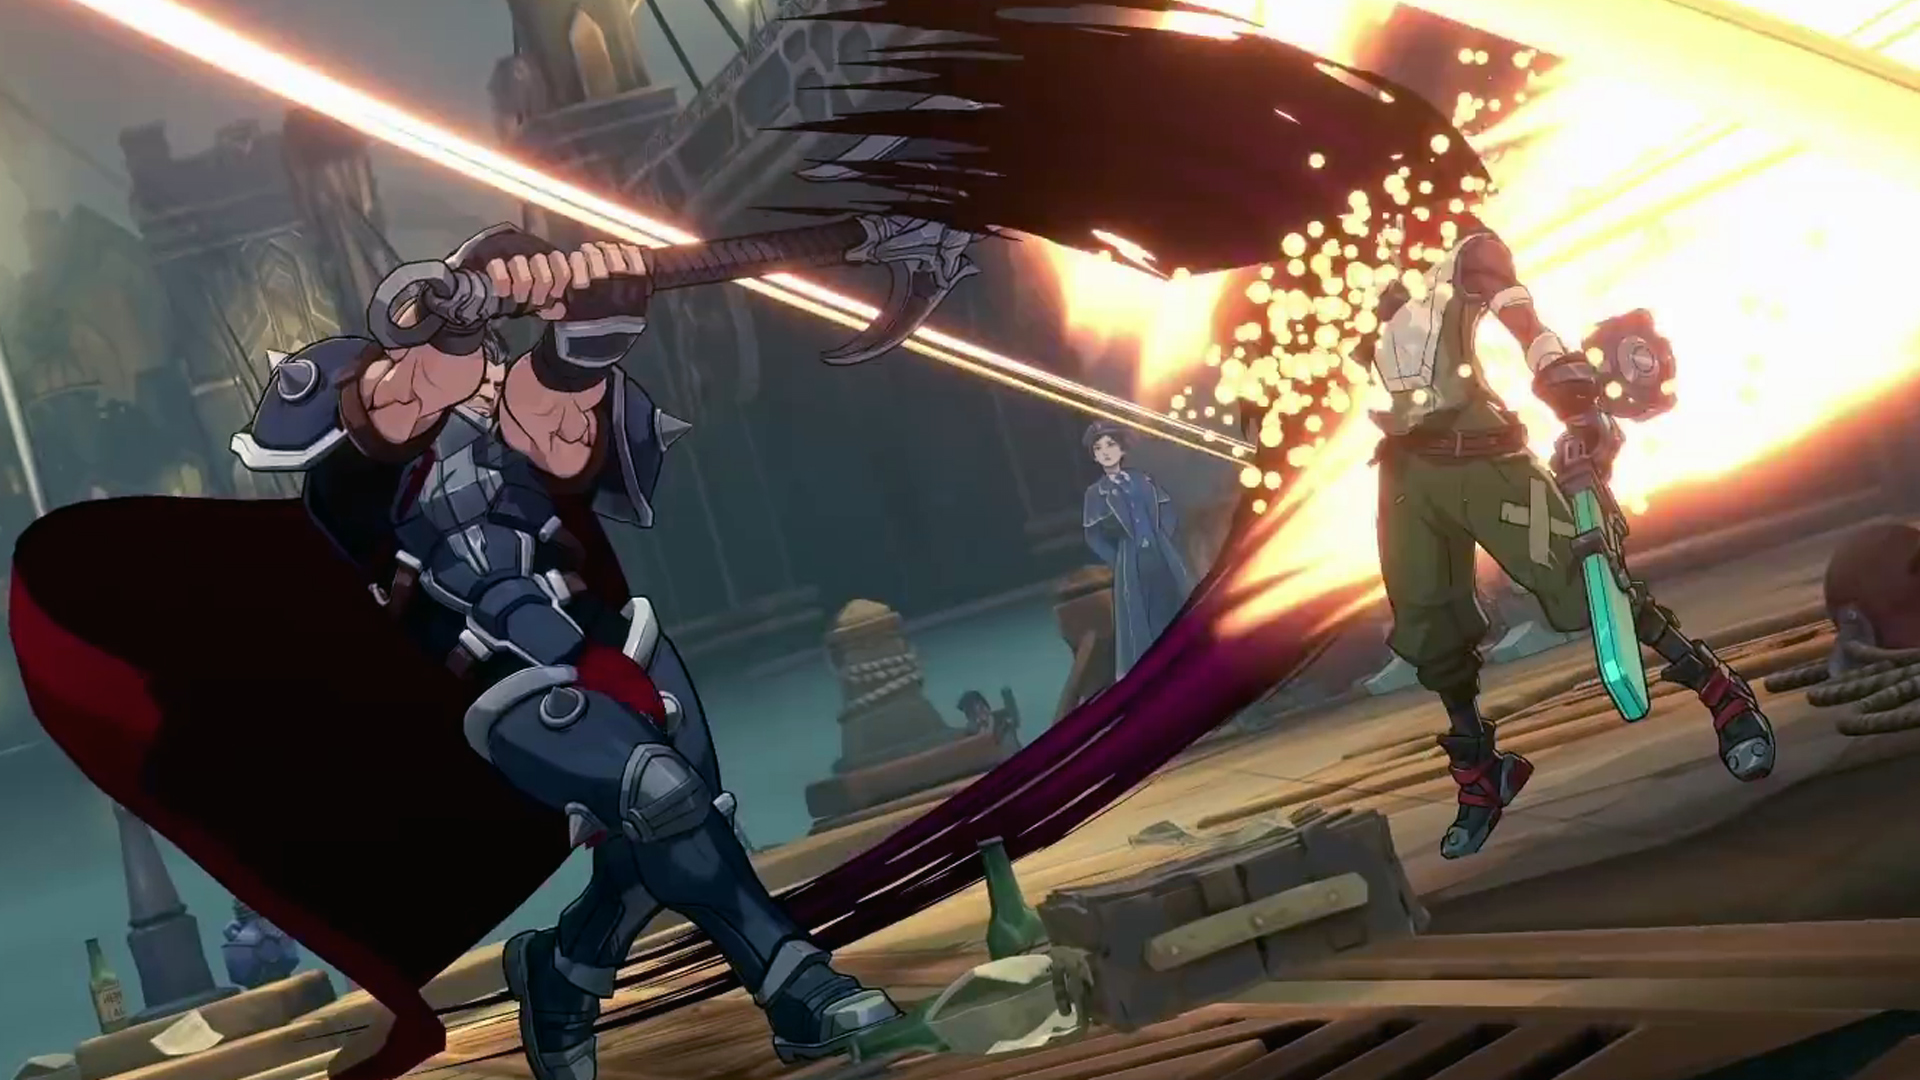 League of Legends fighter Project L gets first gameplay but may still be a ways off